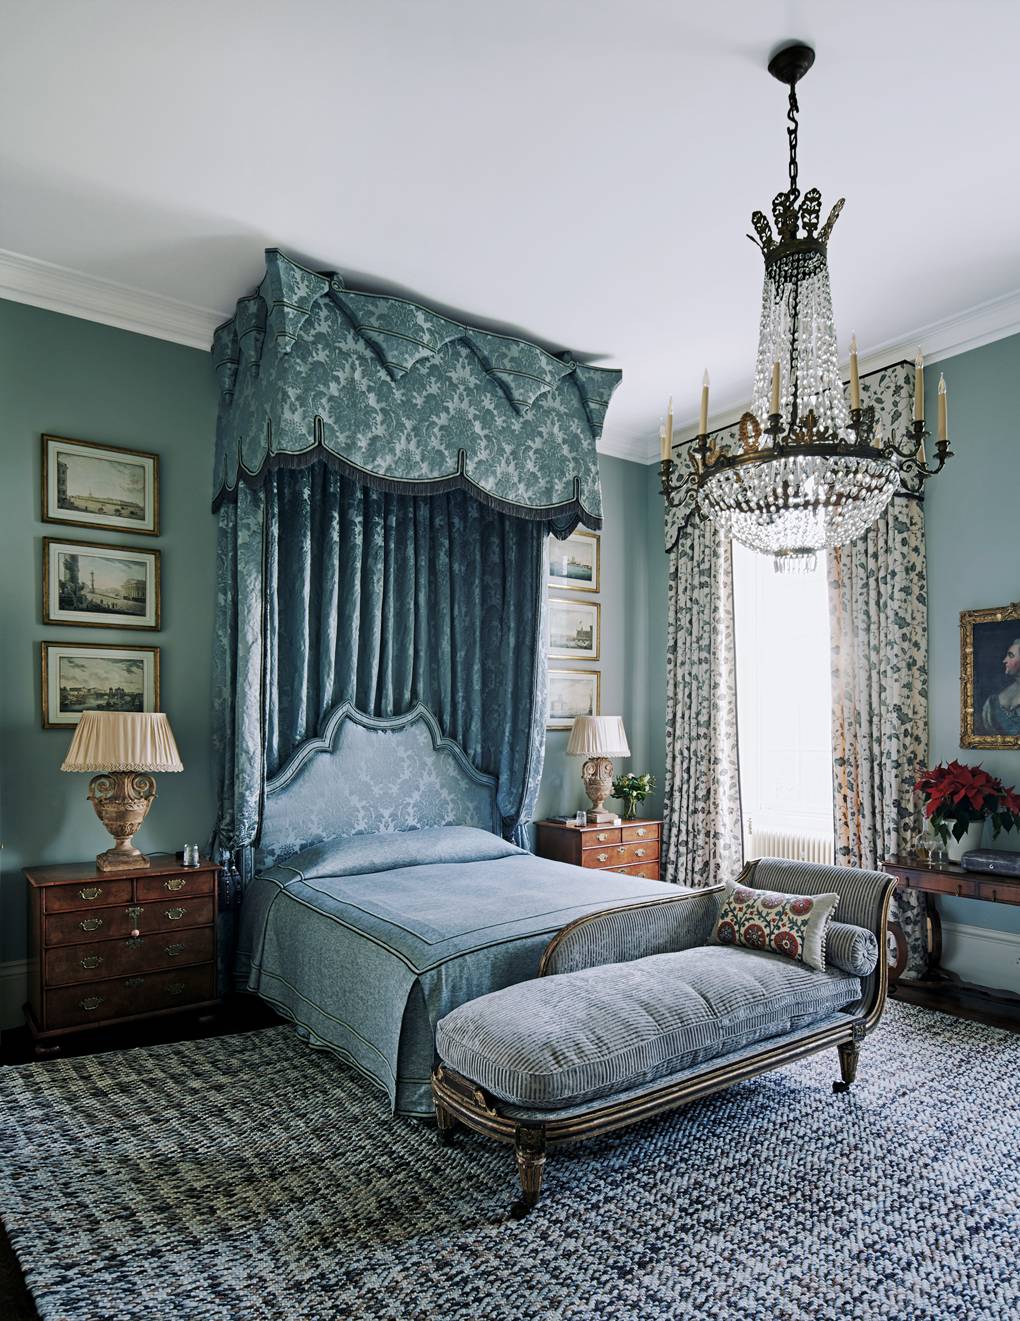 Décor Inspiration: Ven House, an Eighteenth-Century Country House in Somerset